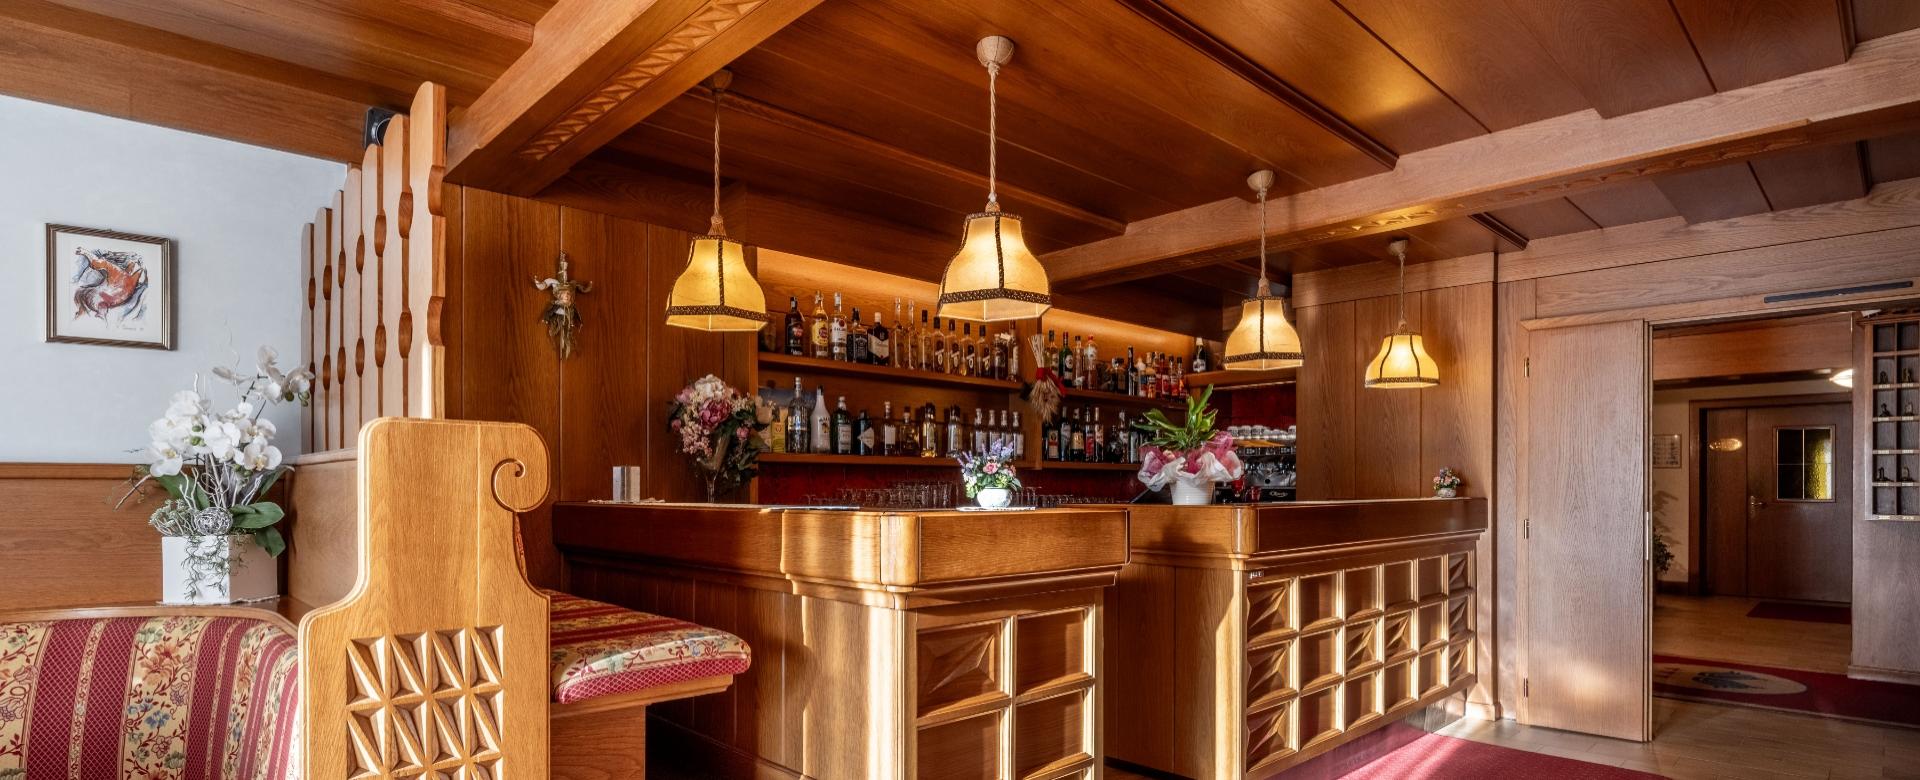 Cozy wooden bar with soft lighting and floral decorations.